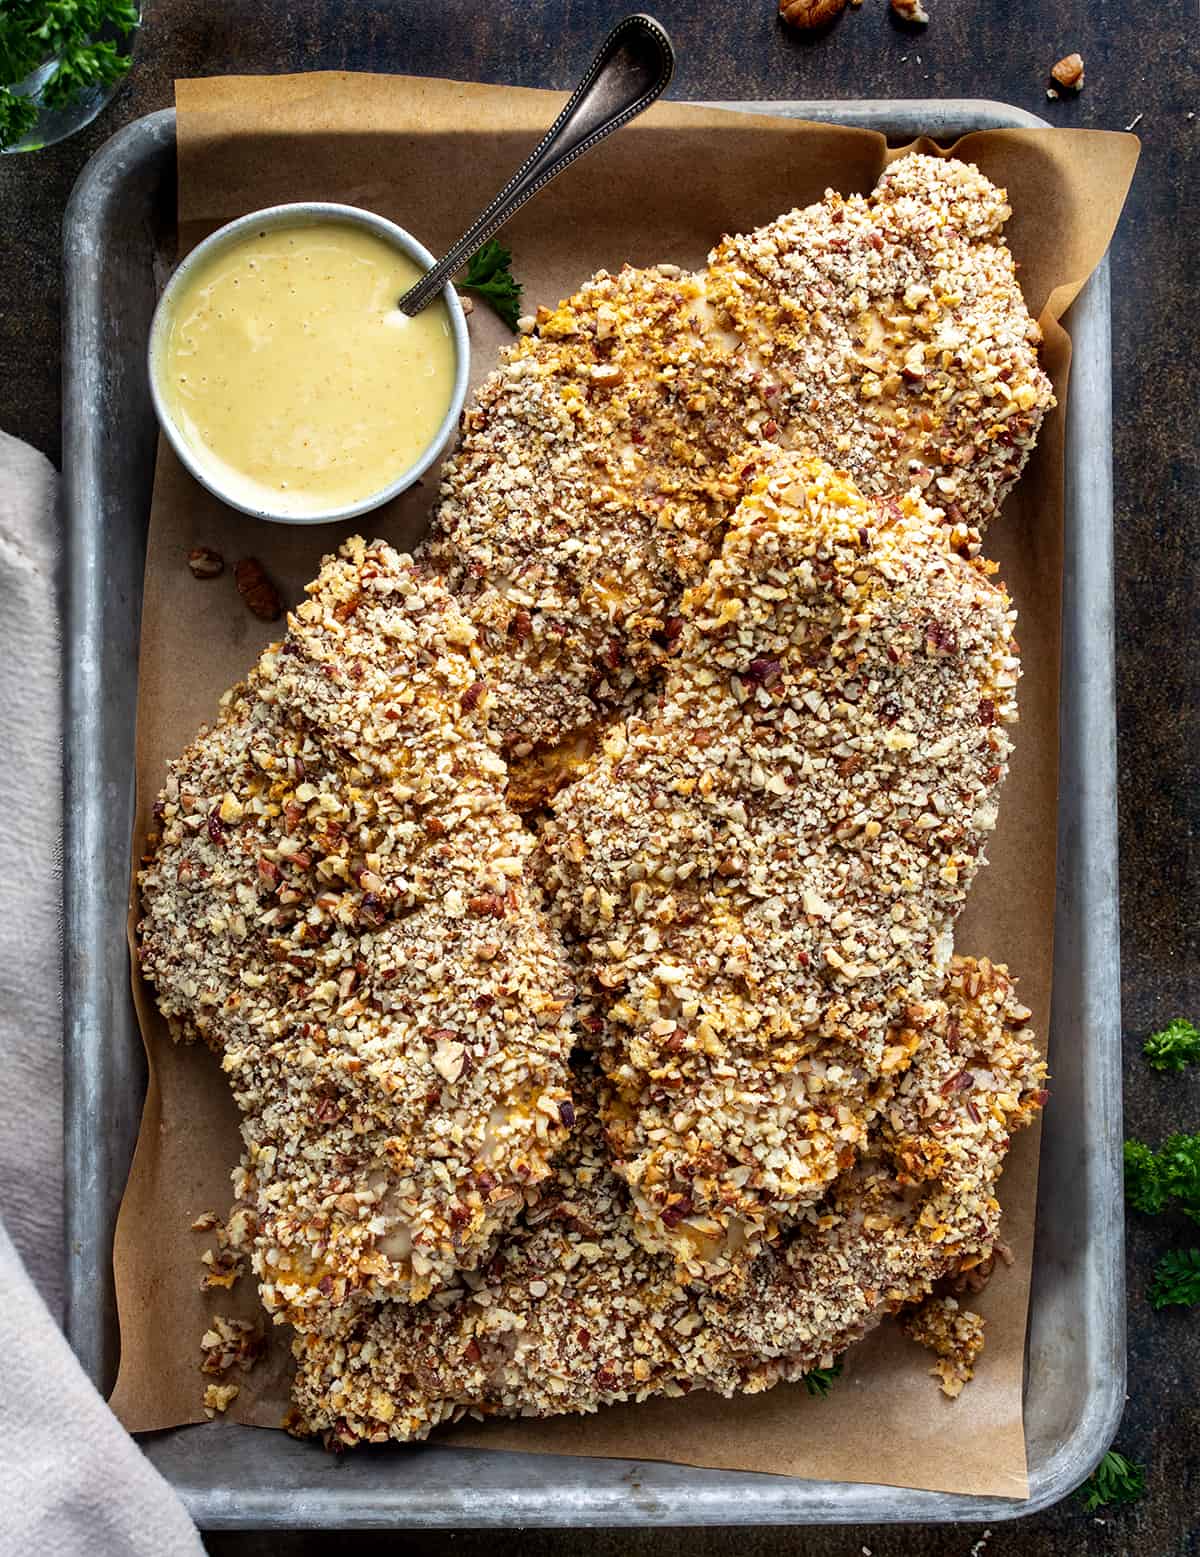 Pecan Crusted Chicken in a Platter with Sauce from Overhead.